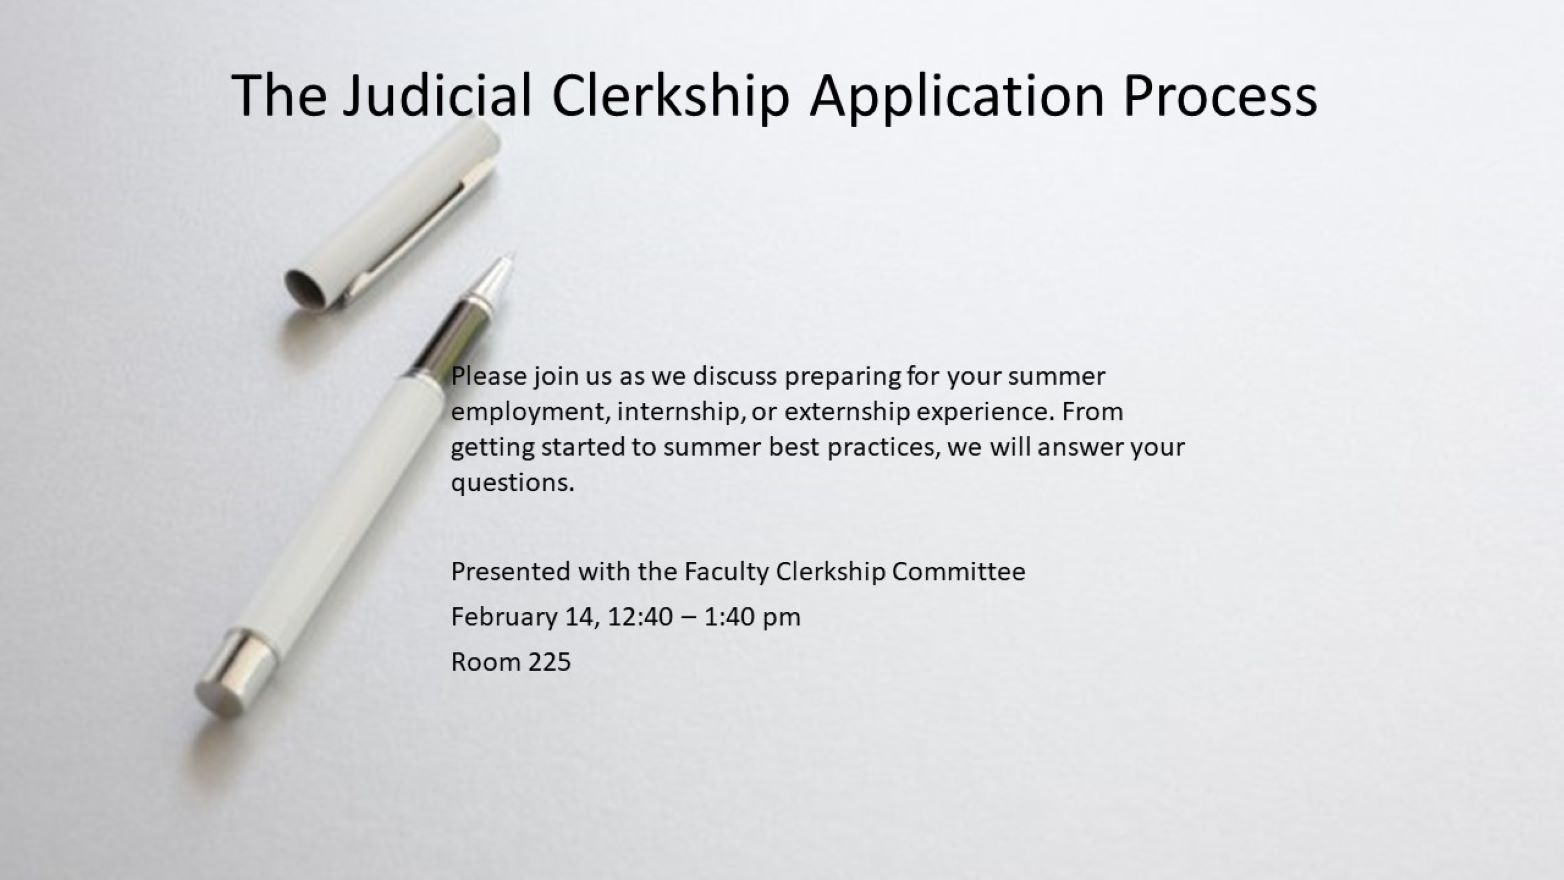 The Judicial Clerkship Application Process. Please join us as we discuss preparing for your summer employment, internship, or externship experience. From getting started to summer best practices, we will answer your questions. Presented with the Faculty Clerkship Committee. February 14, 12:40 - 1:40 pm. Room 225. 